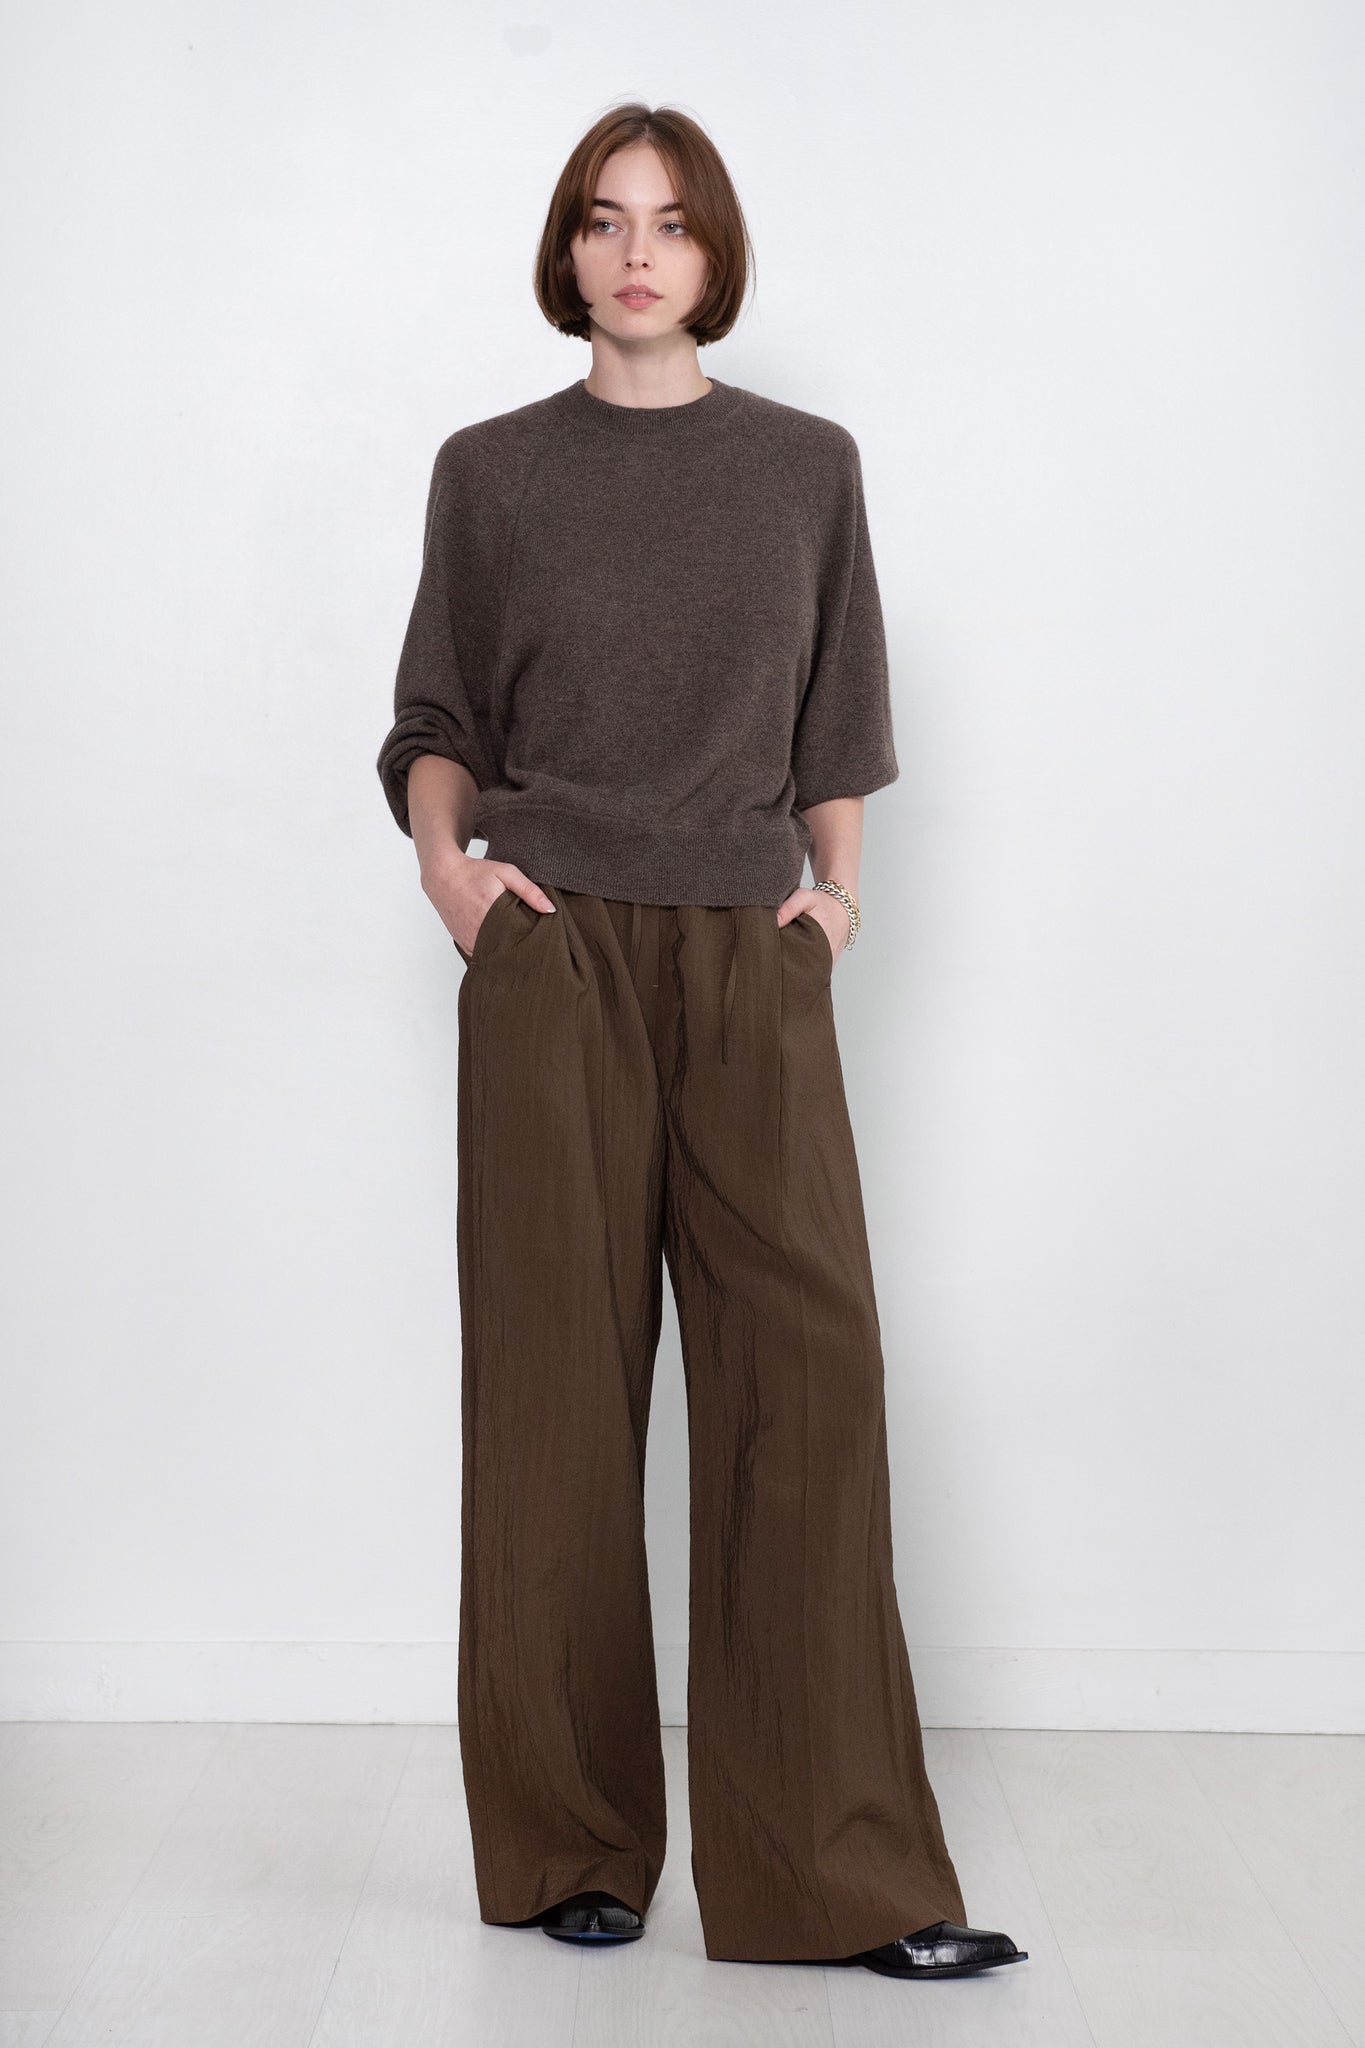 LOULOU STUDIO - Pemba Cashmere Sweater, Grizzly Melange